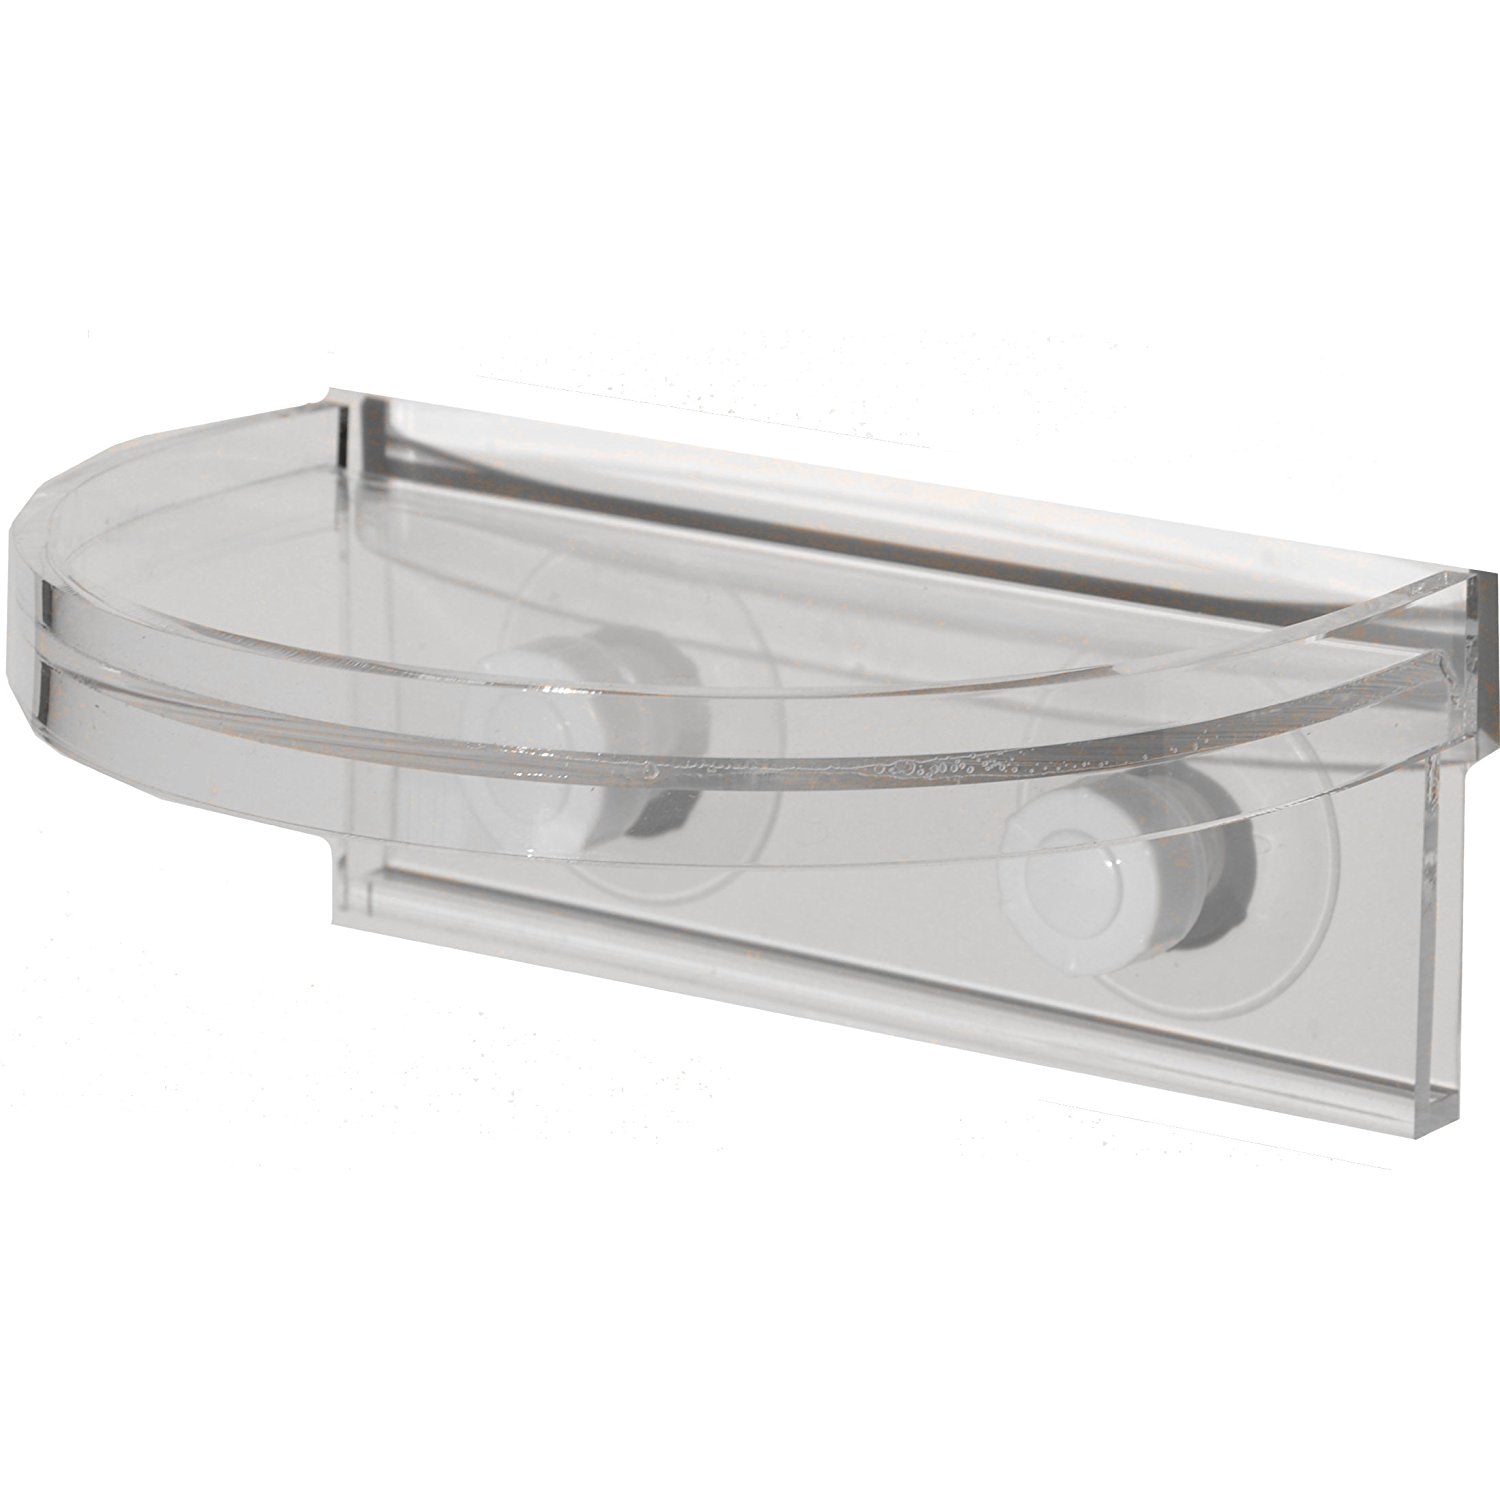 Window Shelves Clear Various Sizes Clear Window Shelf Custom Window  Attaching Suction Cup Works Great and Well Tested Product 